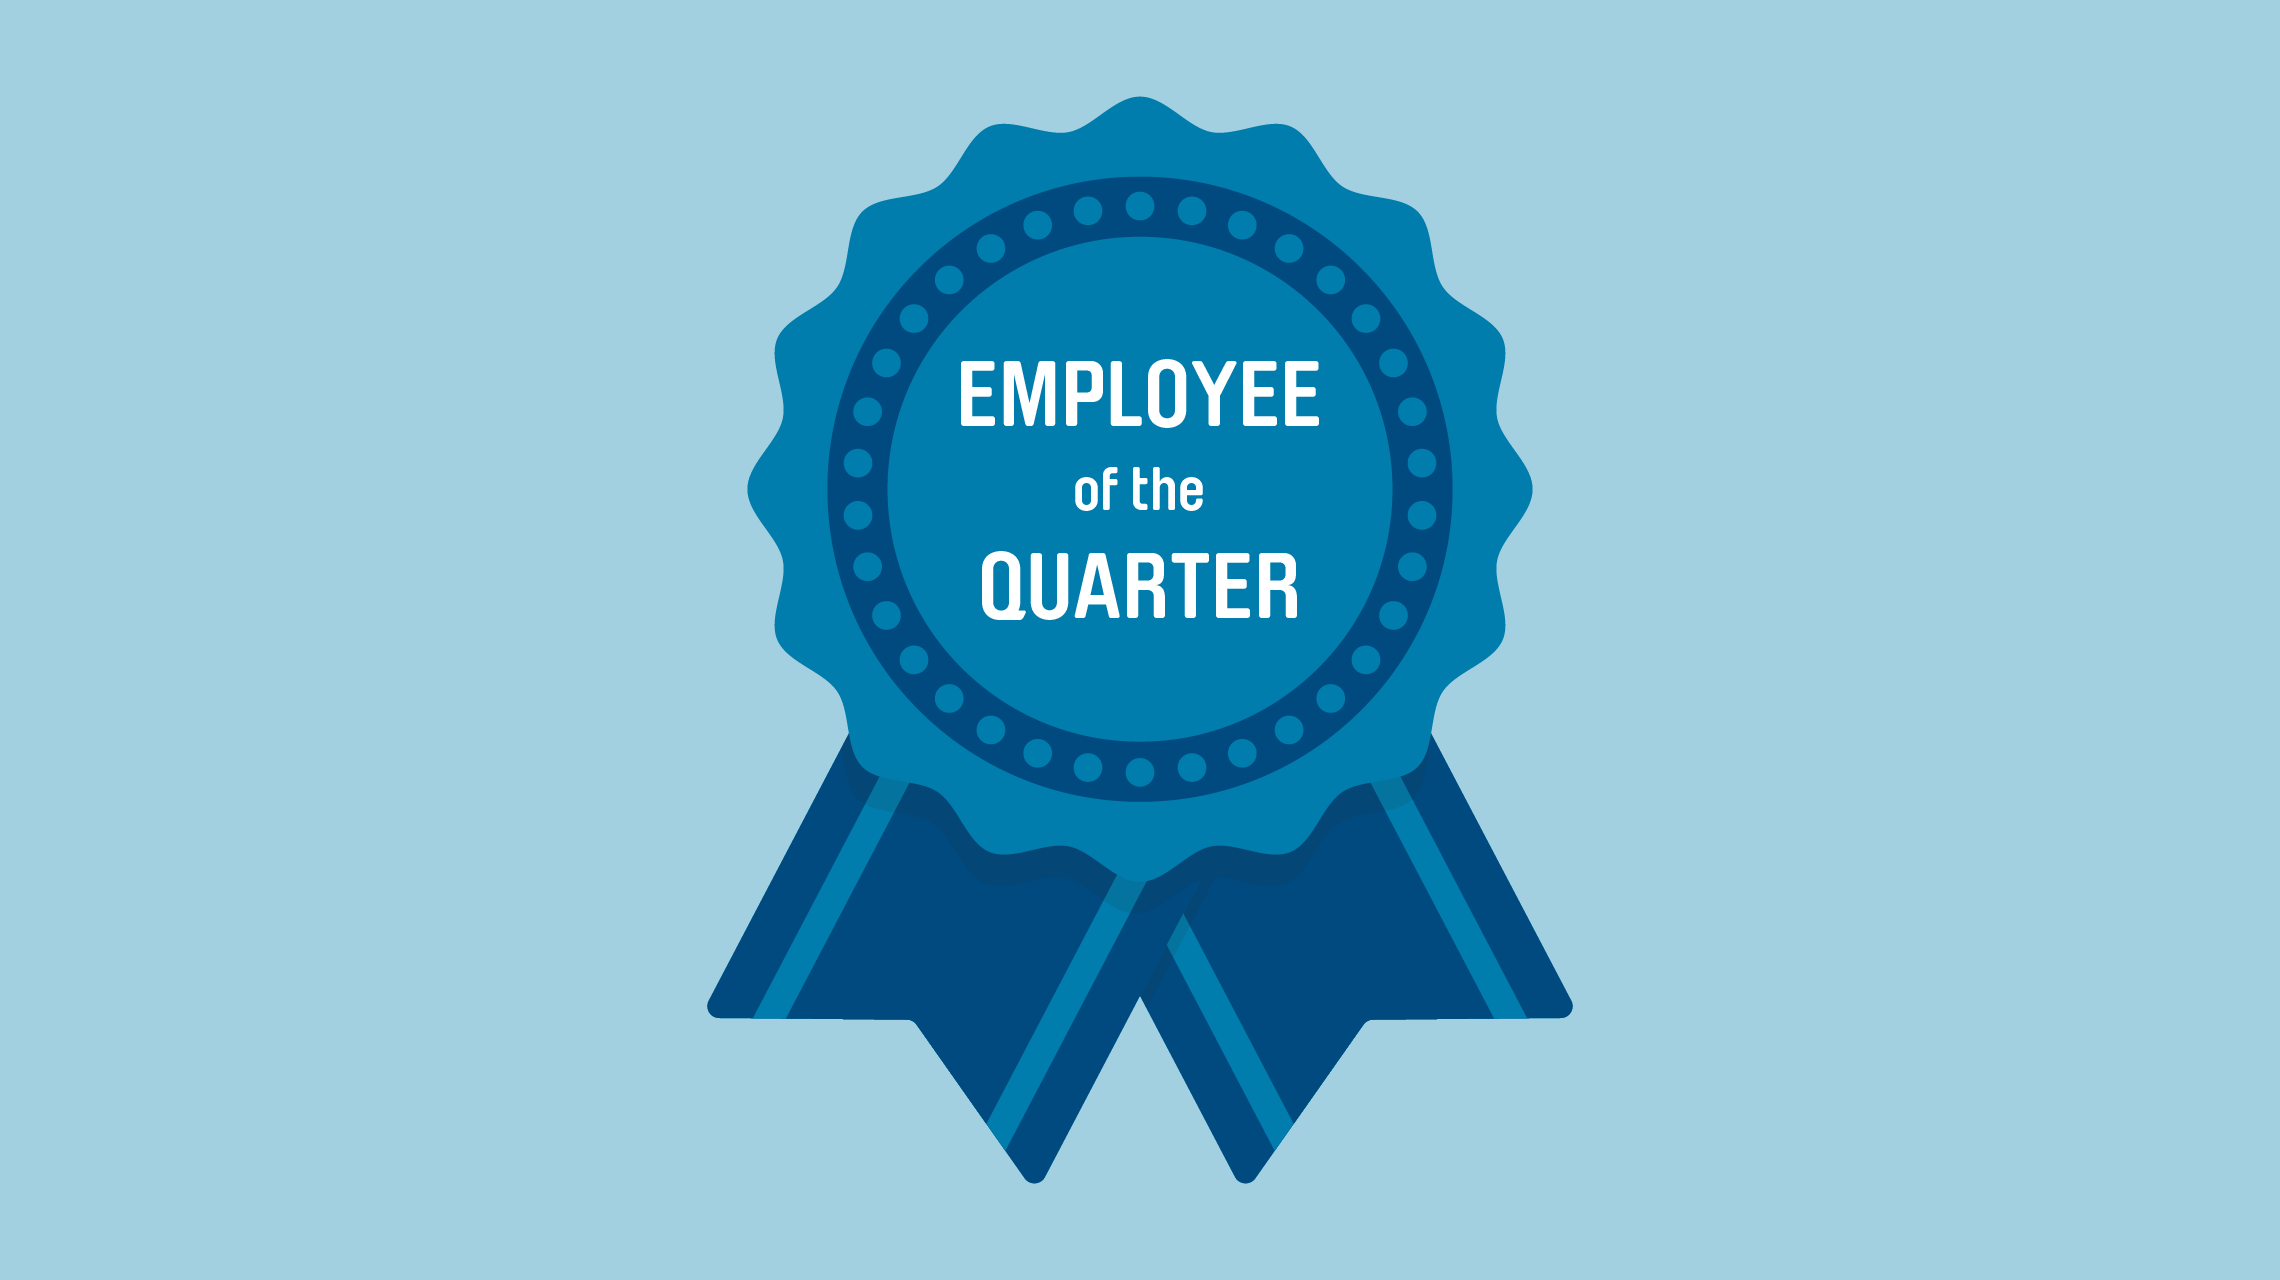 Employee of the Quarter graphic